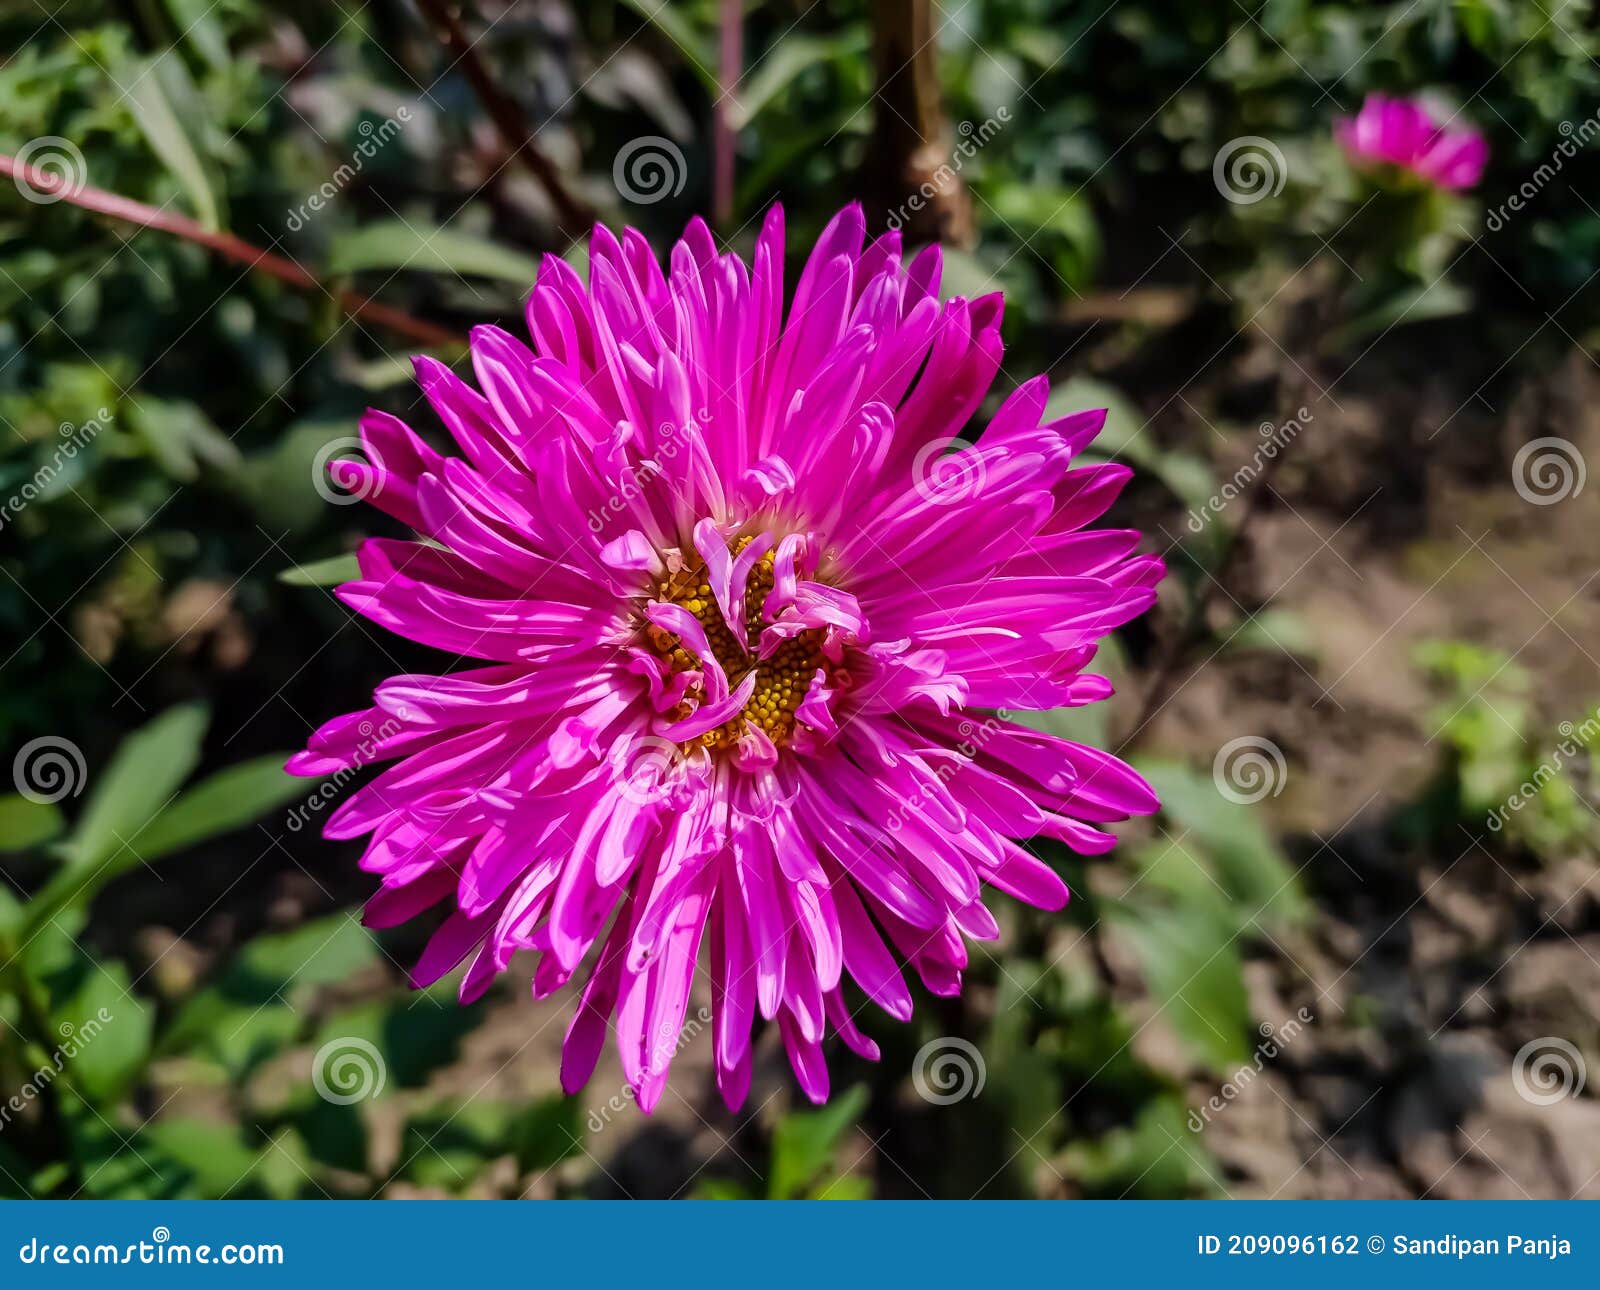 aster is a genus of perennial flowering plants in the family asteraceae. its circumscription has been narrowed  and it now